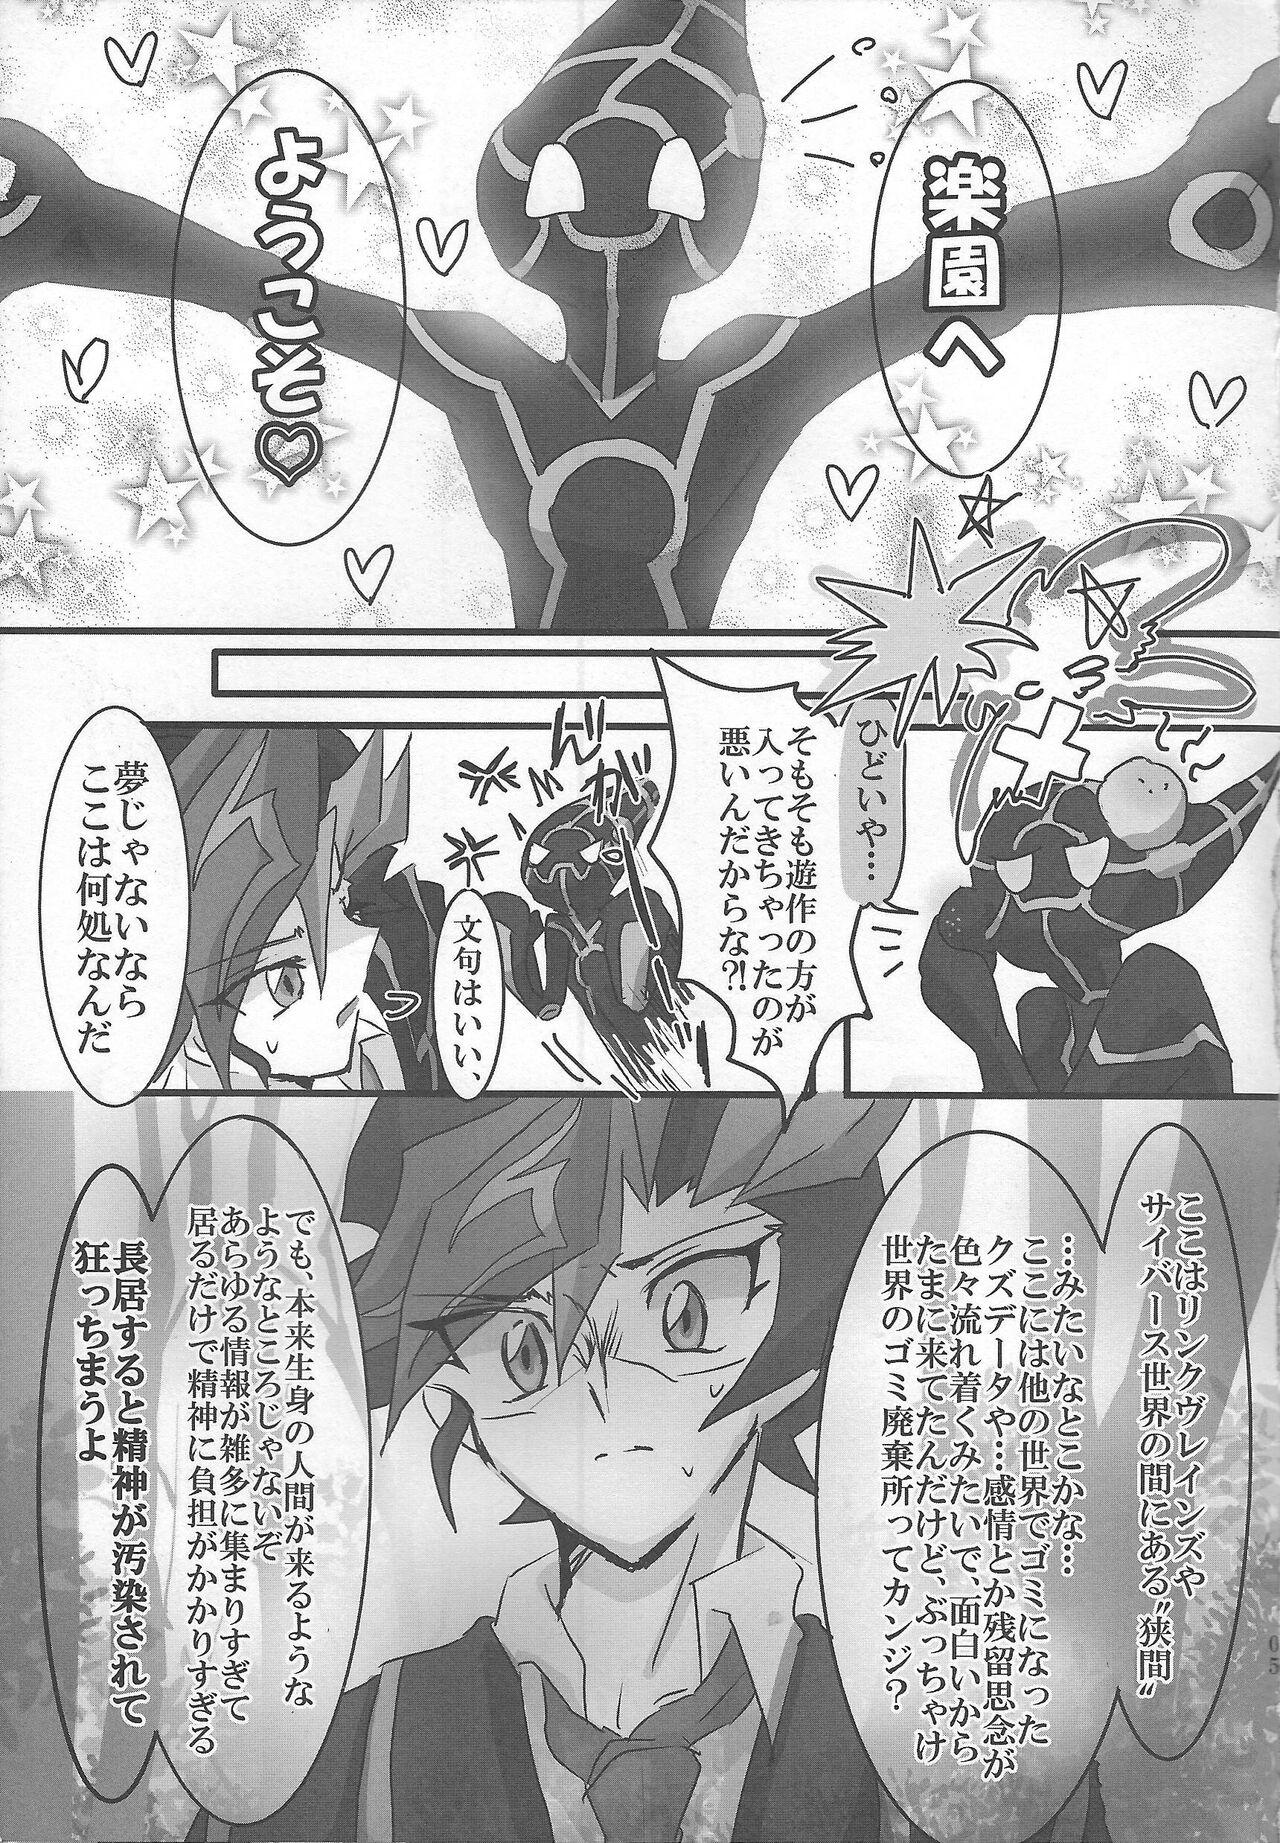 Pee ROOT 3 - Yu gi oh vrains Amatur Porn - Page 4